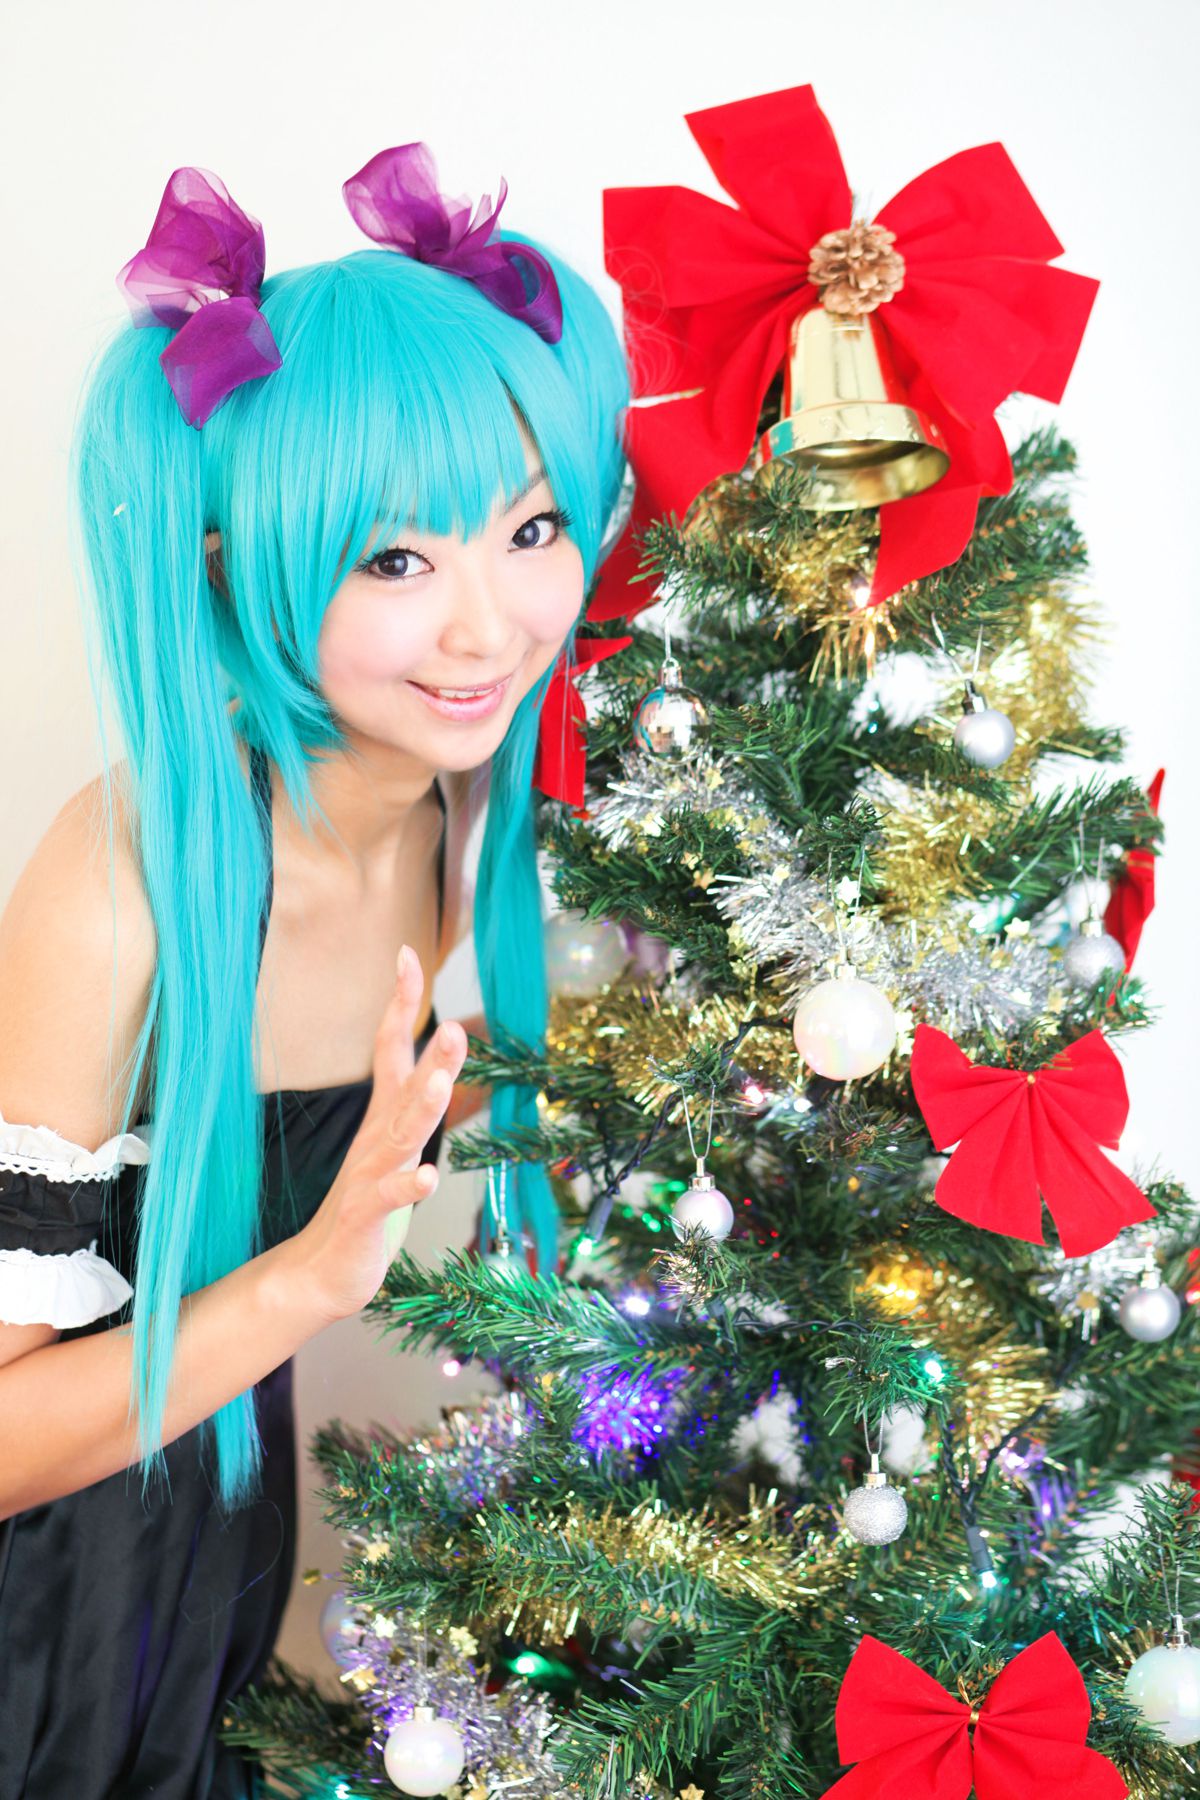 taotuhome[Cosplay] Necoco as Hatsune Miku from Vocaloid 套图第168张